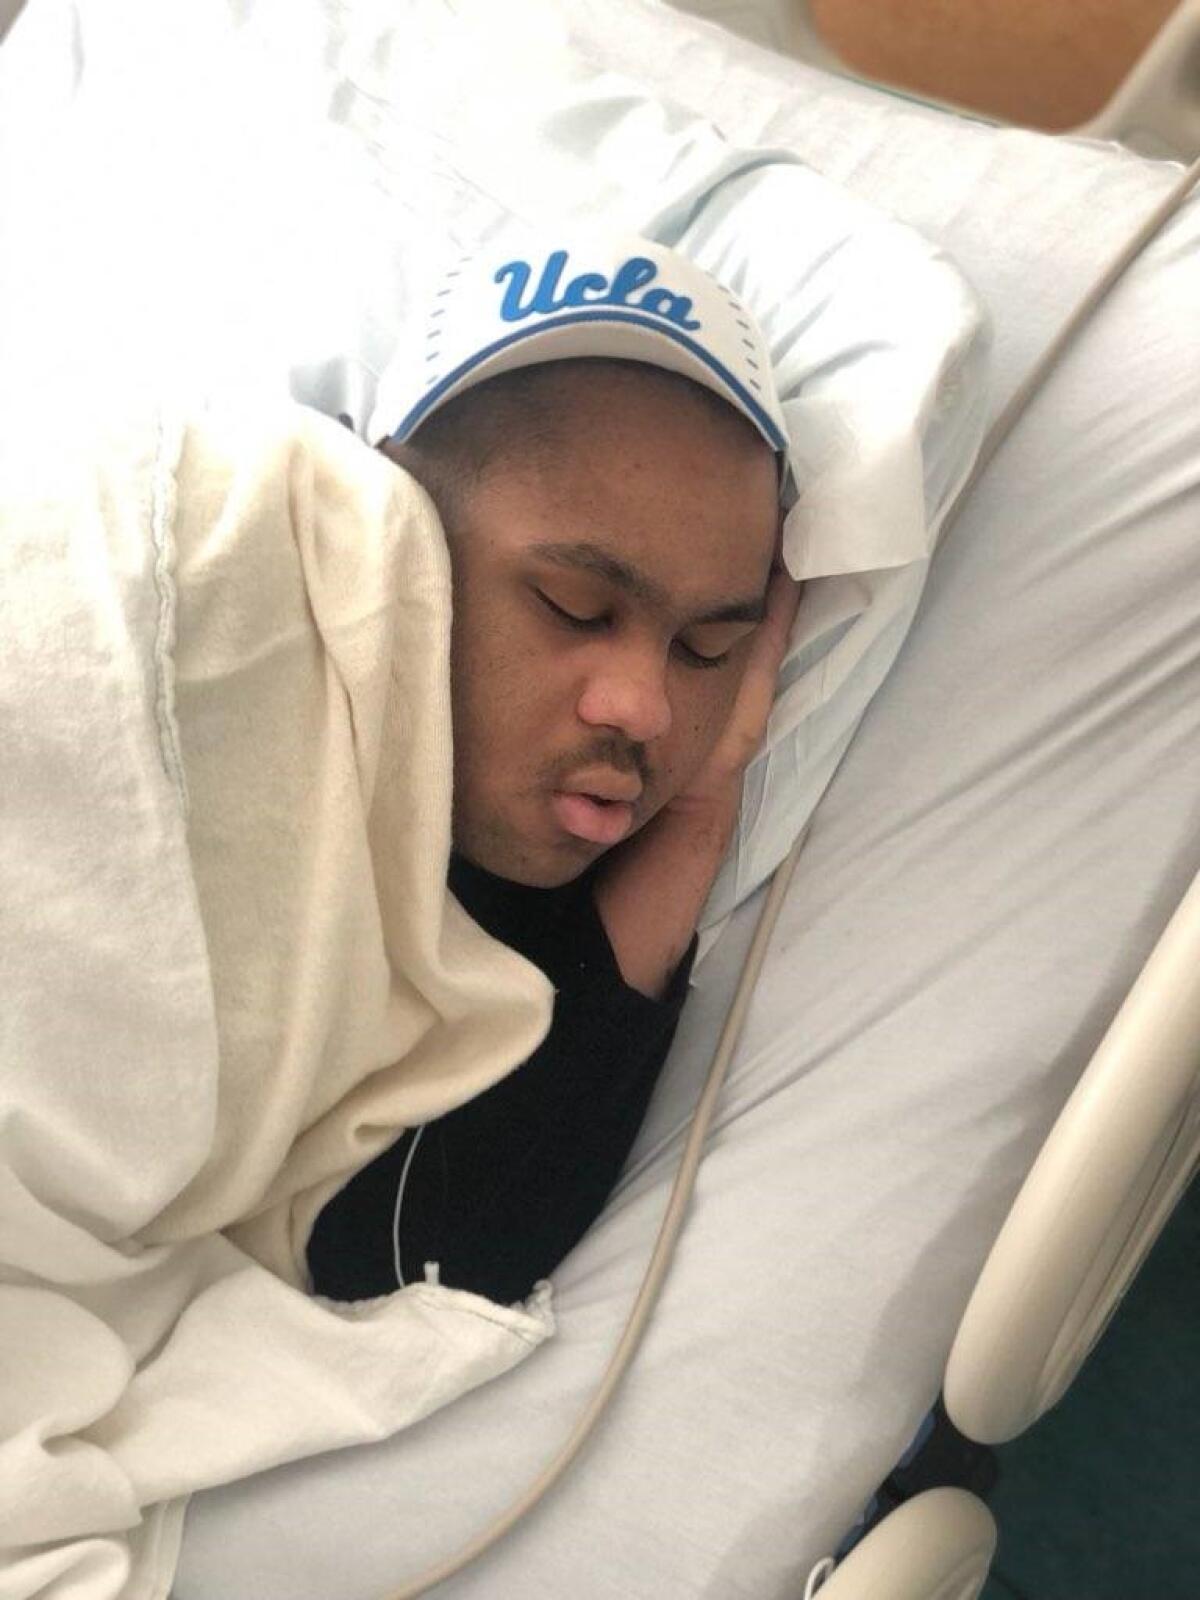 Luke Forbes sleeps in a hospital bed while wearing a UCLA hat 